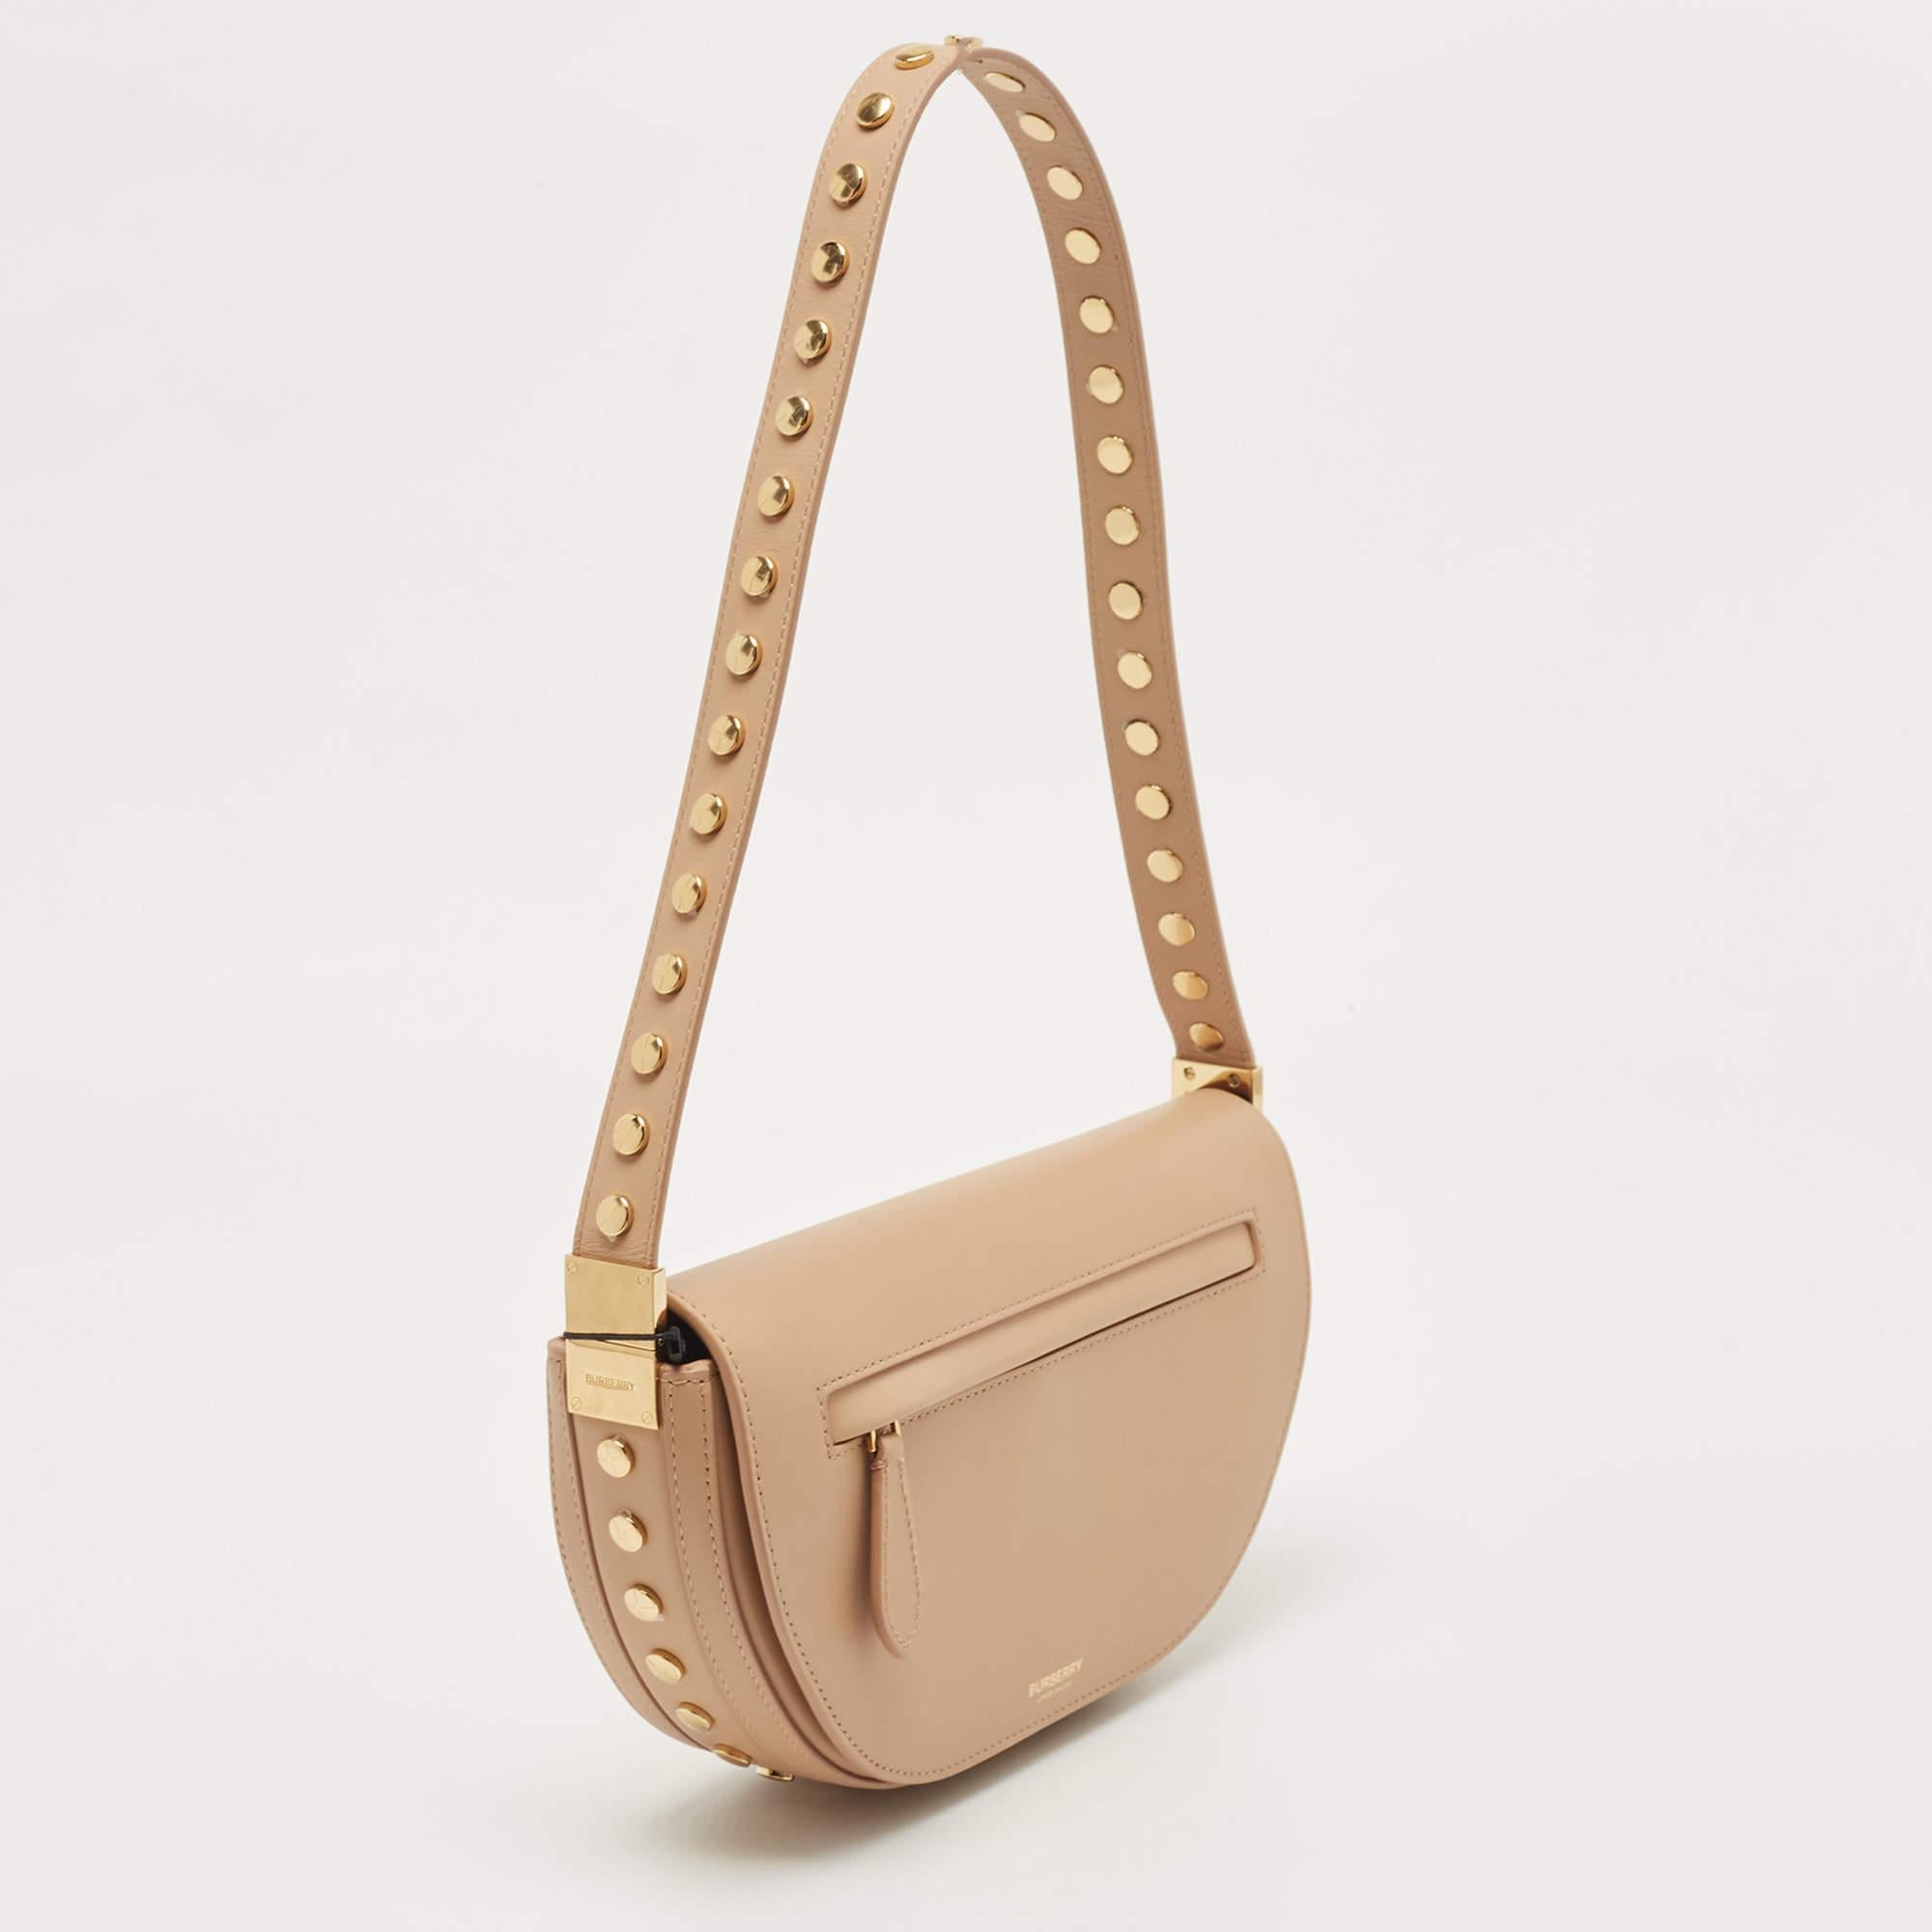 Perfect for conveniently housing your essentials in one place, this Burberry accessory is a worthy investment. It has notable details and offers a look of luxury.

